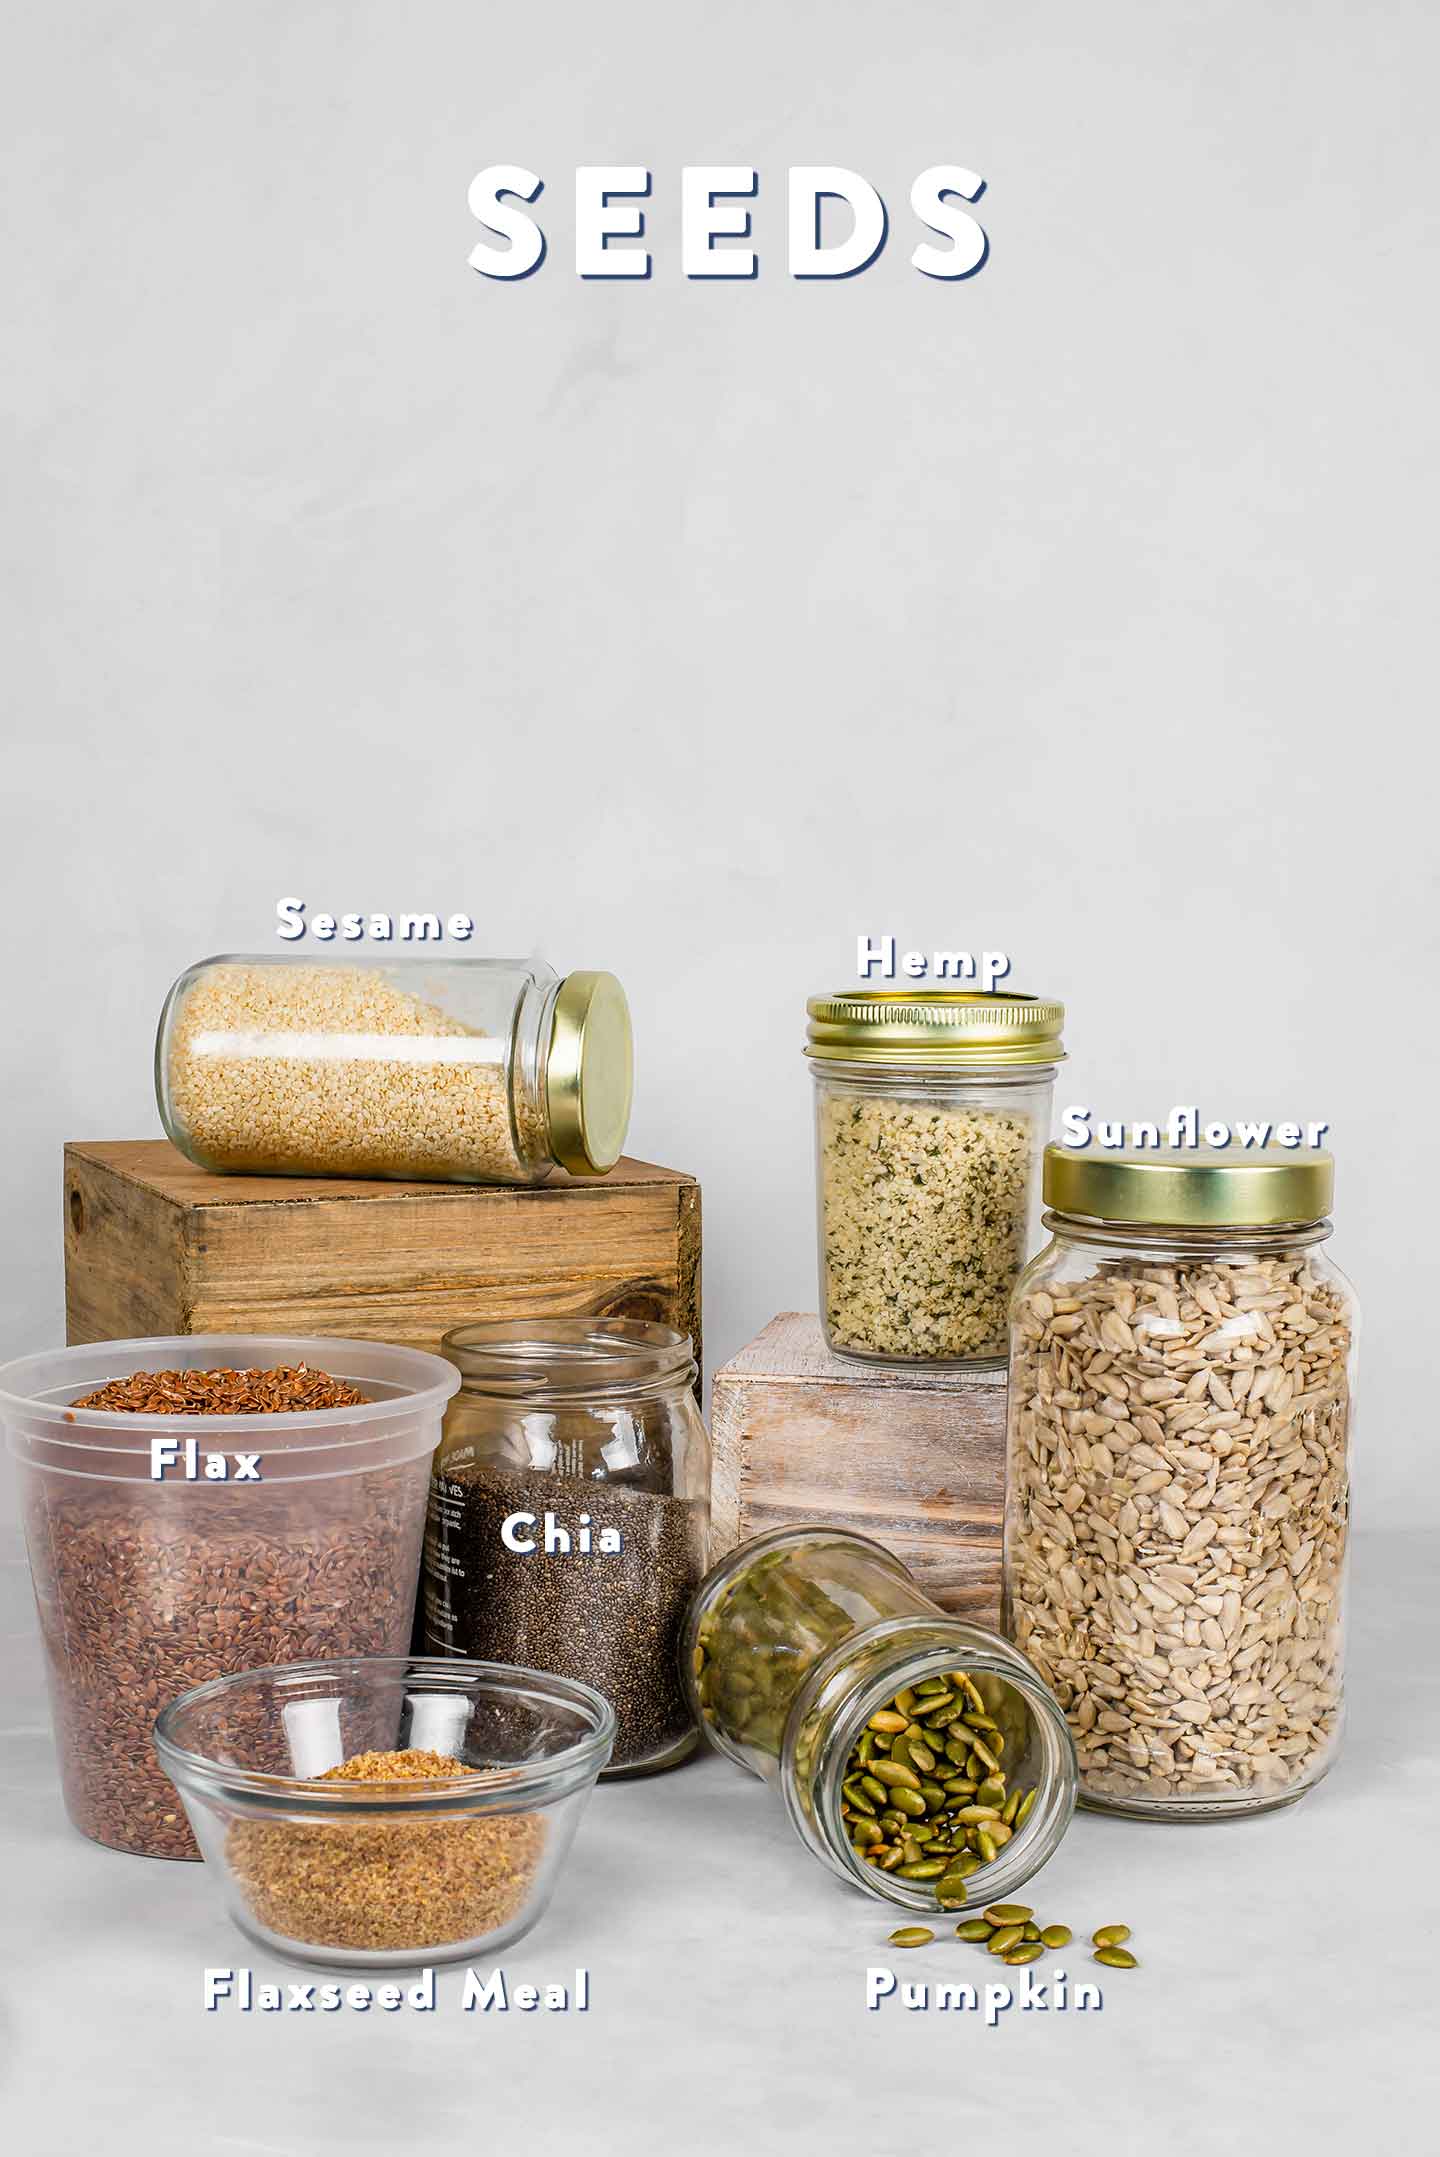 A grouping of different seed varieties in glass jars. Both whole flaxseed and ground flaxseed meal are pictured.